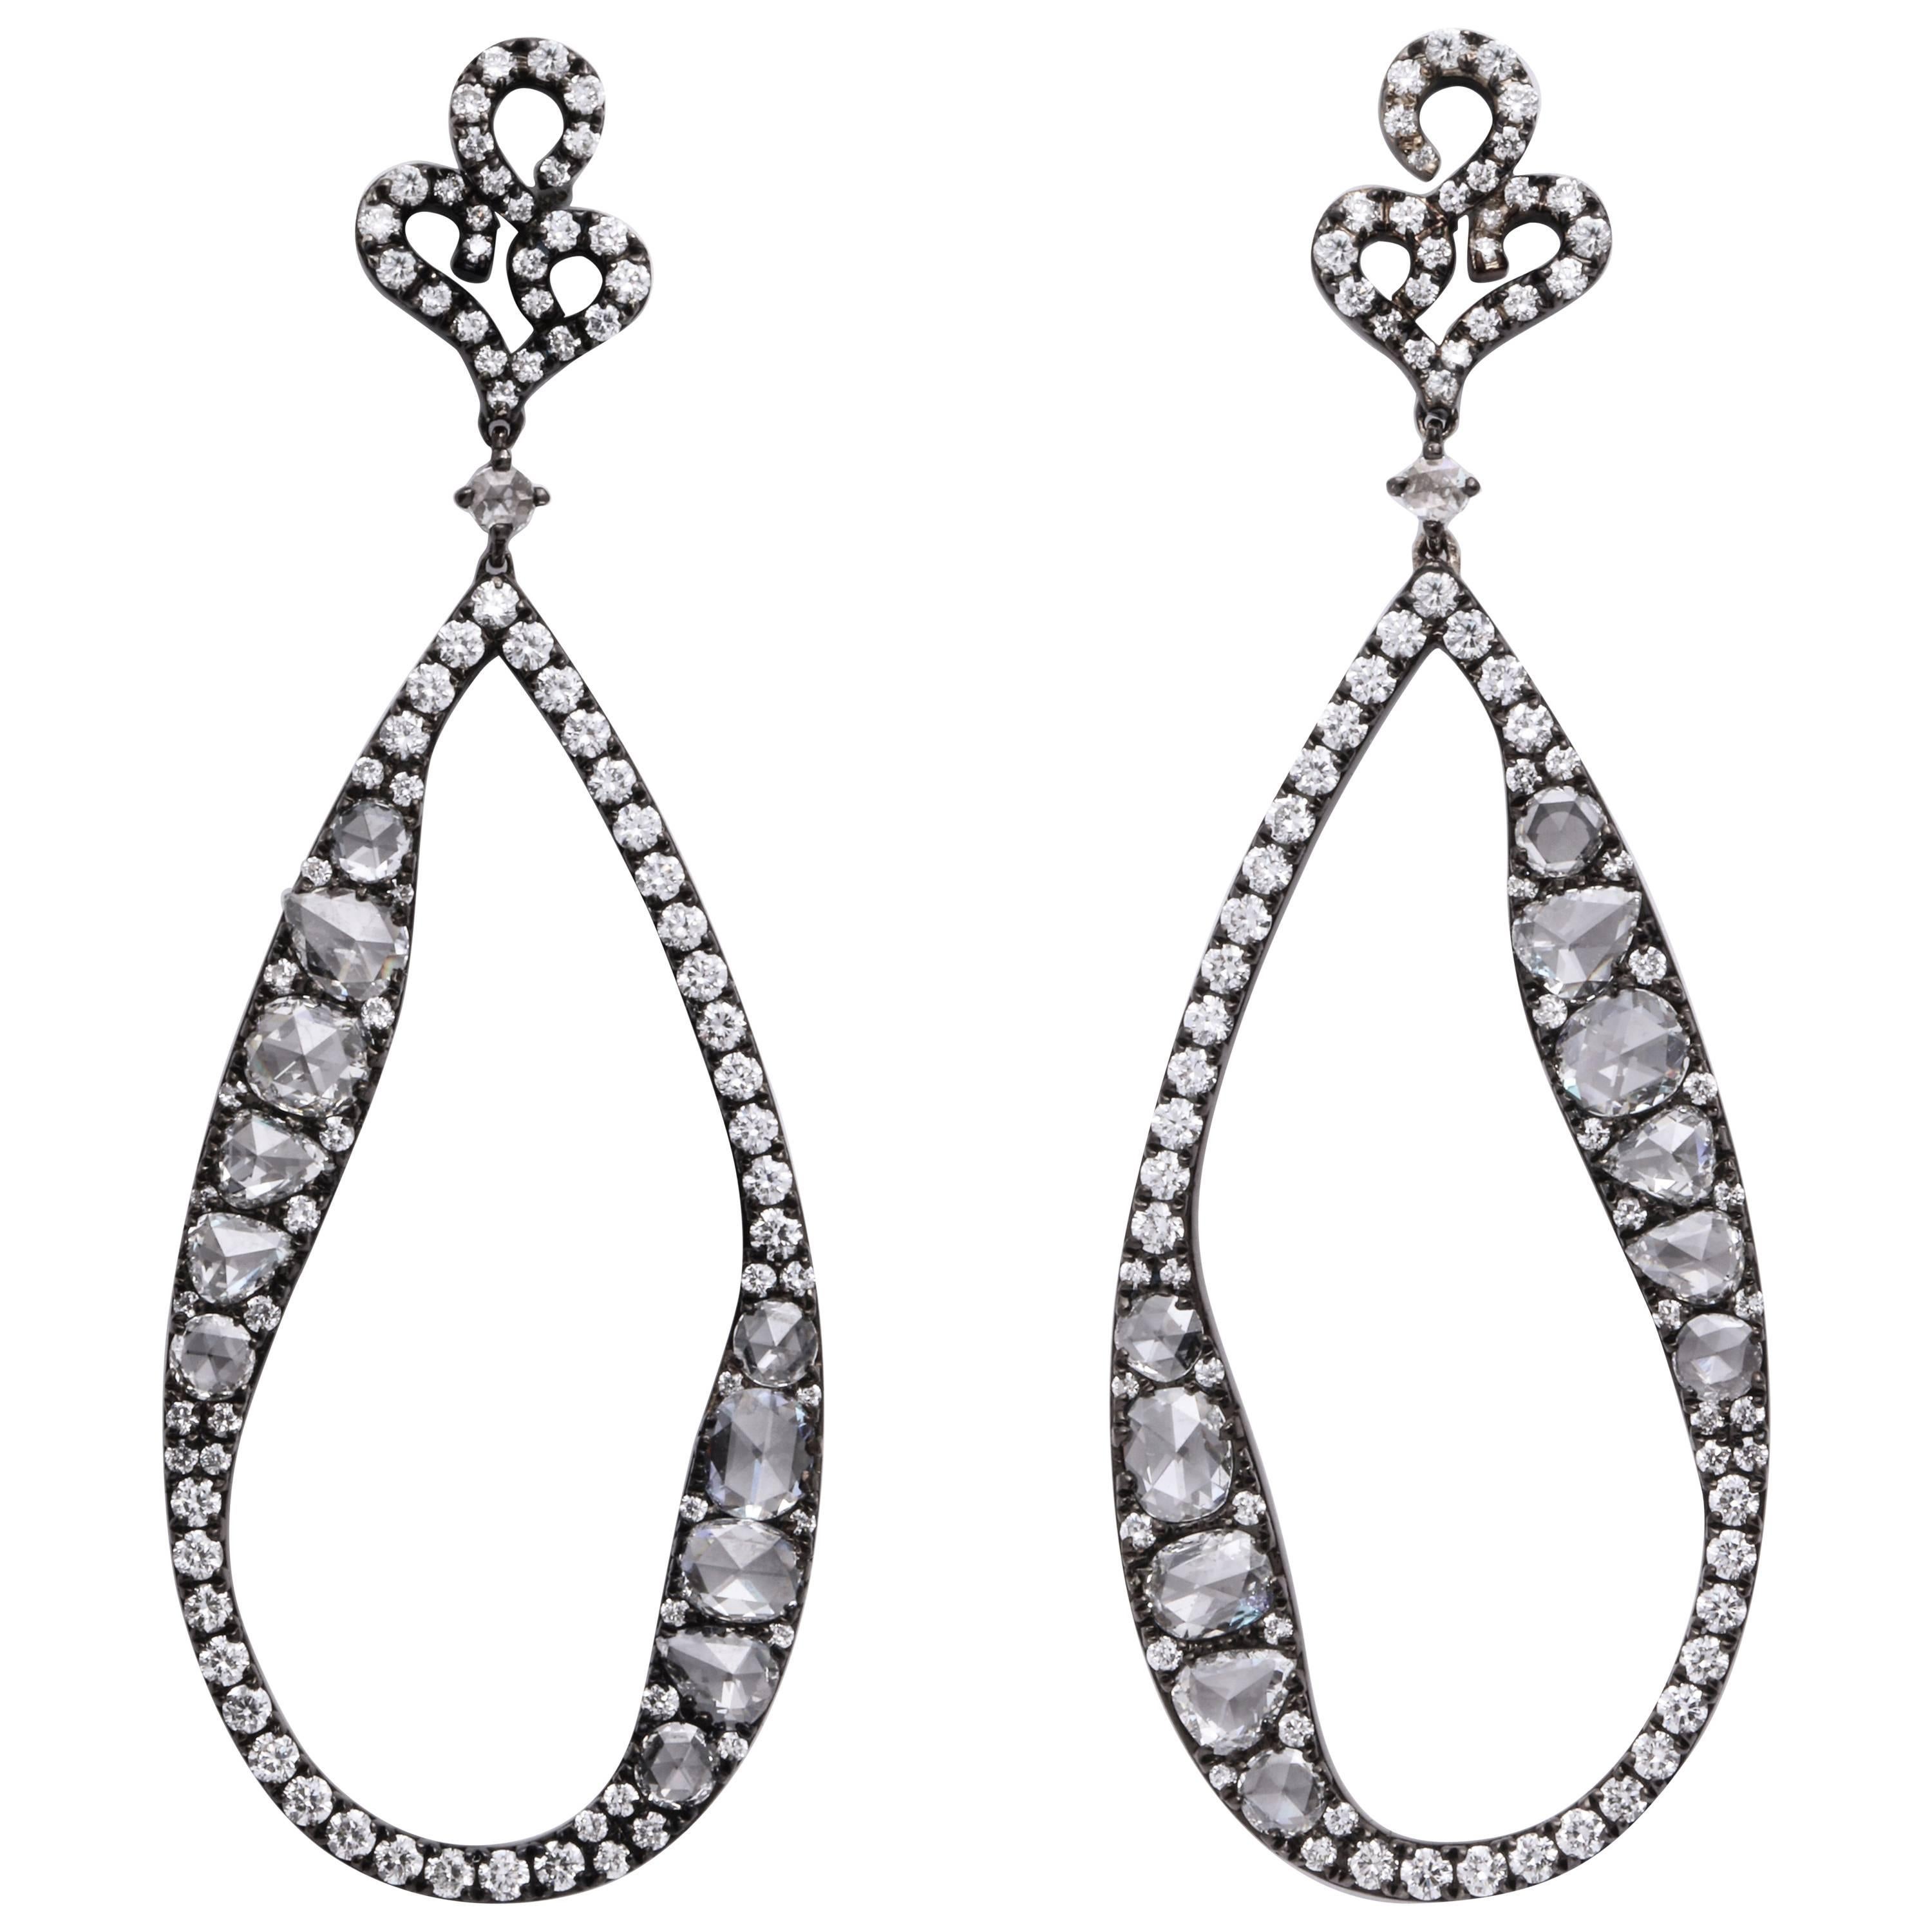 Diamond and White Gold Statement Ear Pendant Earrings